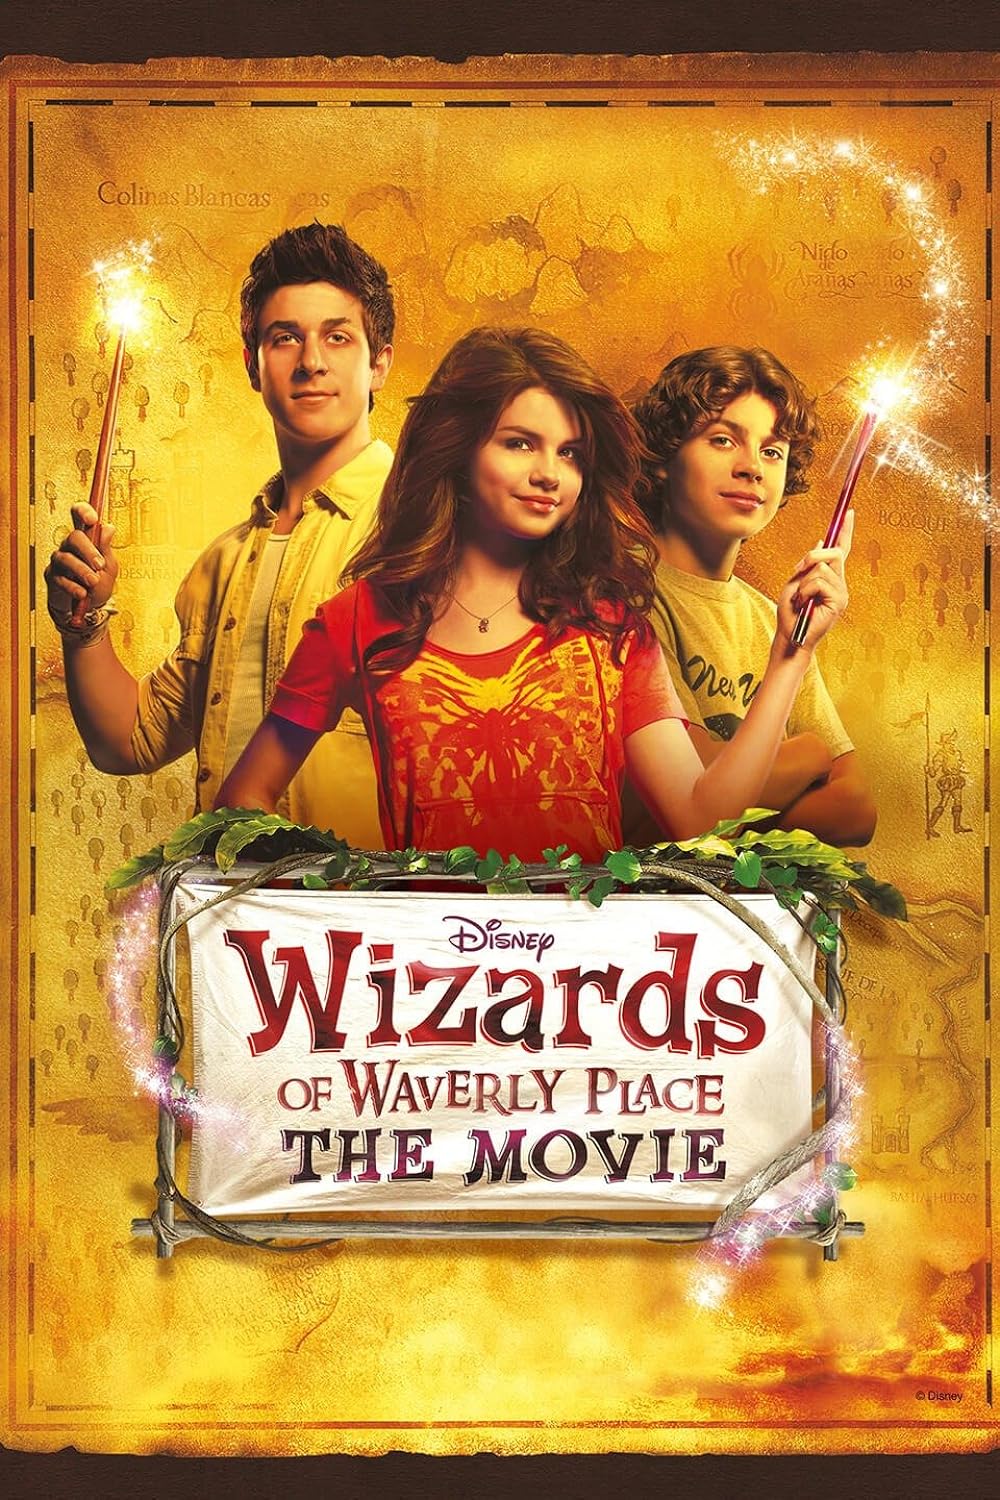 Wizards of Waverly Place: The Movie (2009) 128Kbps 23.976Fps 48Khz 2.0Ch Disney+ DD+ E-AC3 Turkish Audio TAC